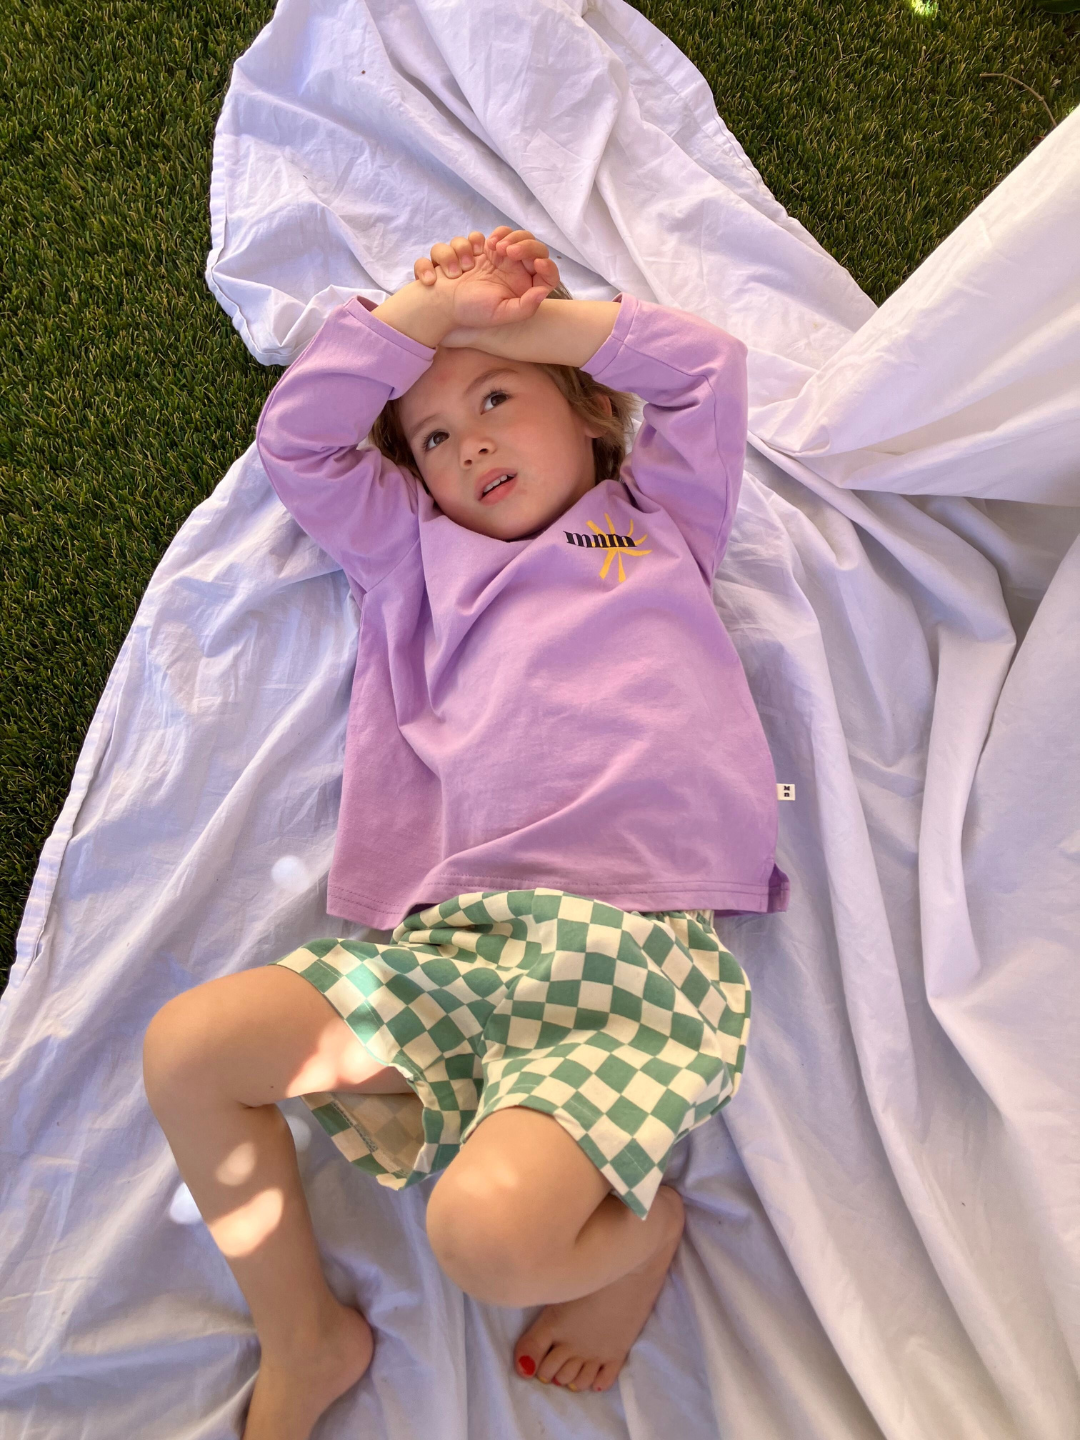 A child wearing the kids Minimal Longsleeve Tee in purple, paired with checkerboard patterned shorts in teal and ivory. He is lying on a white picnic cloth on grass.